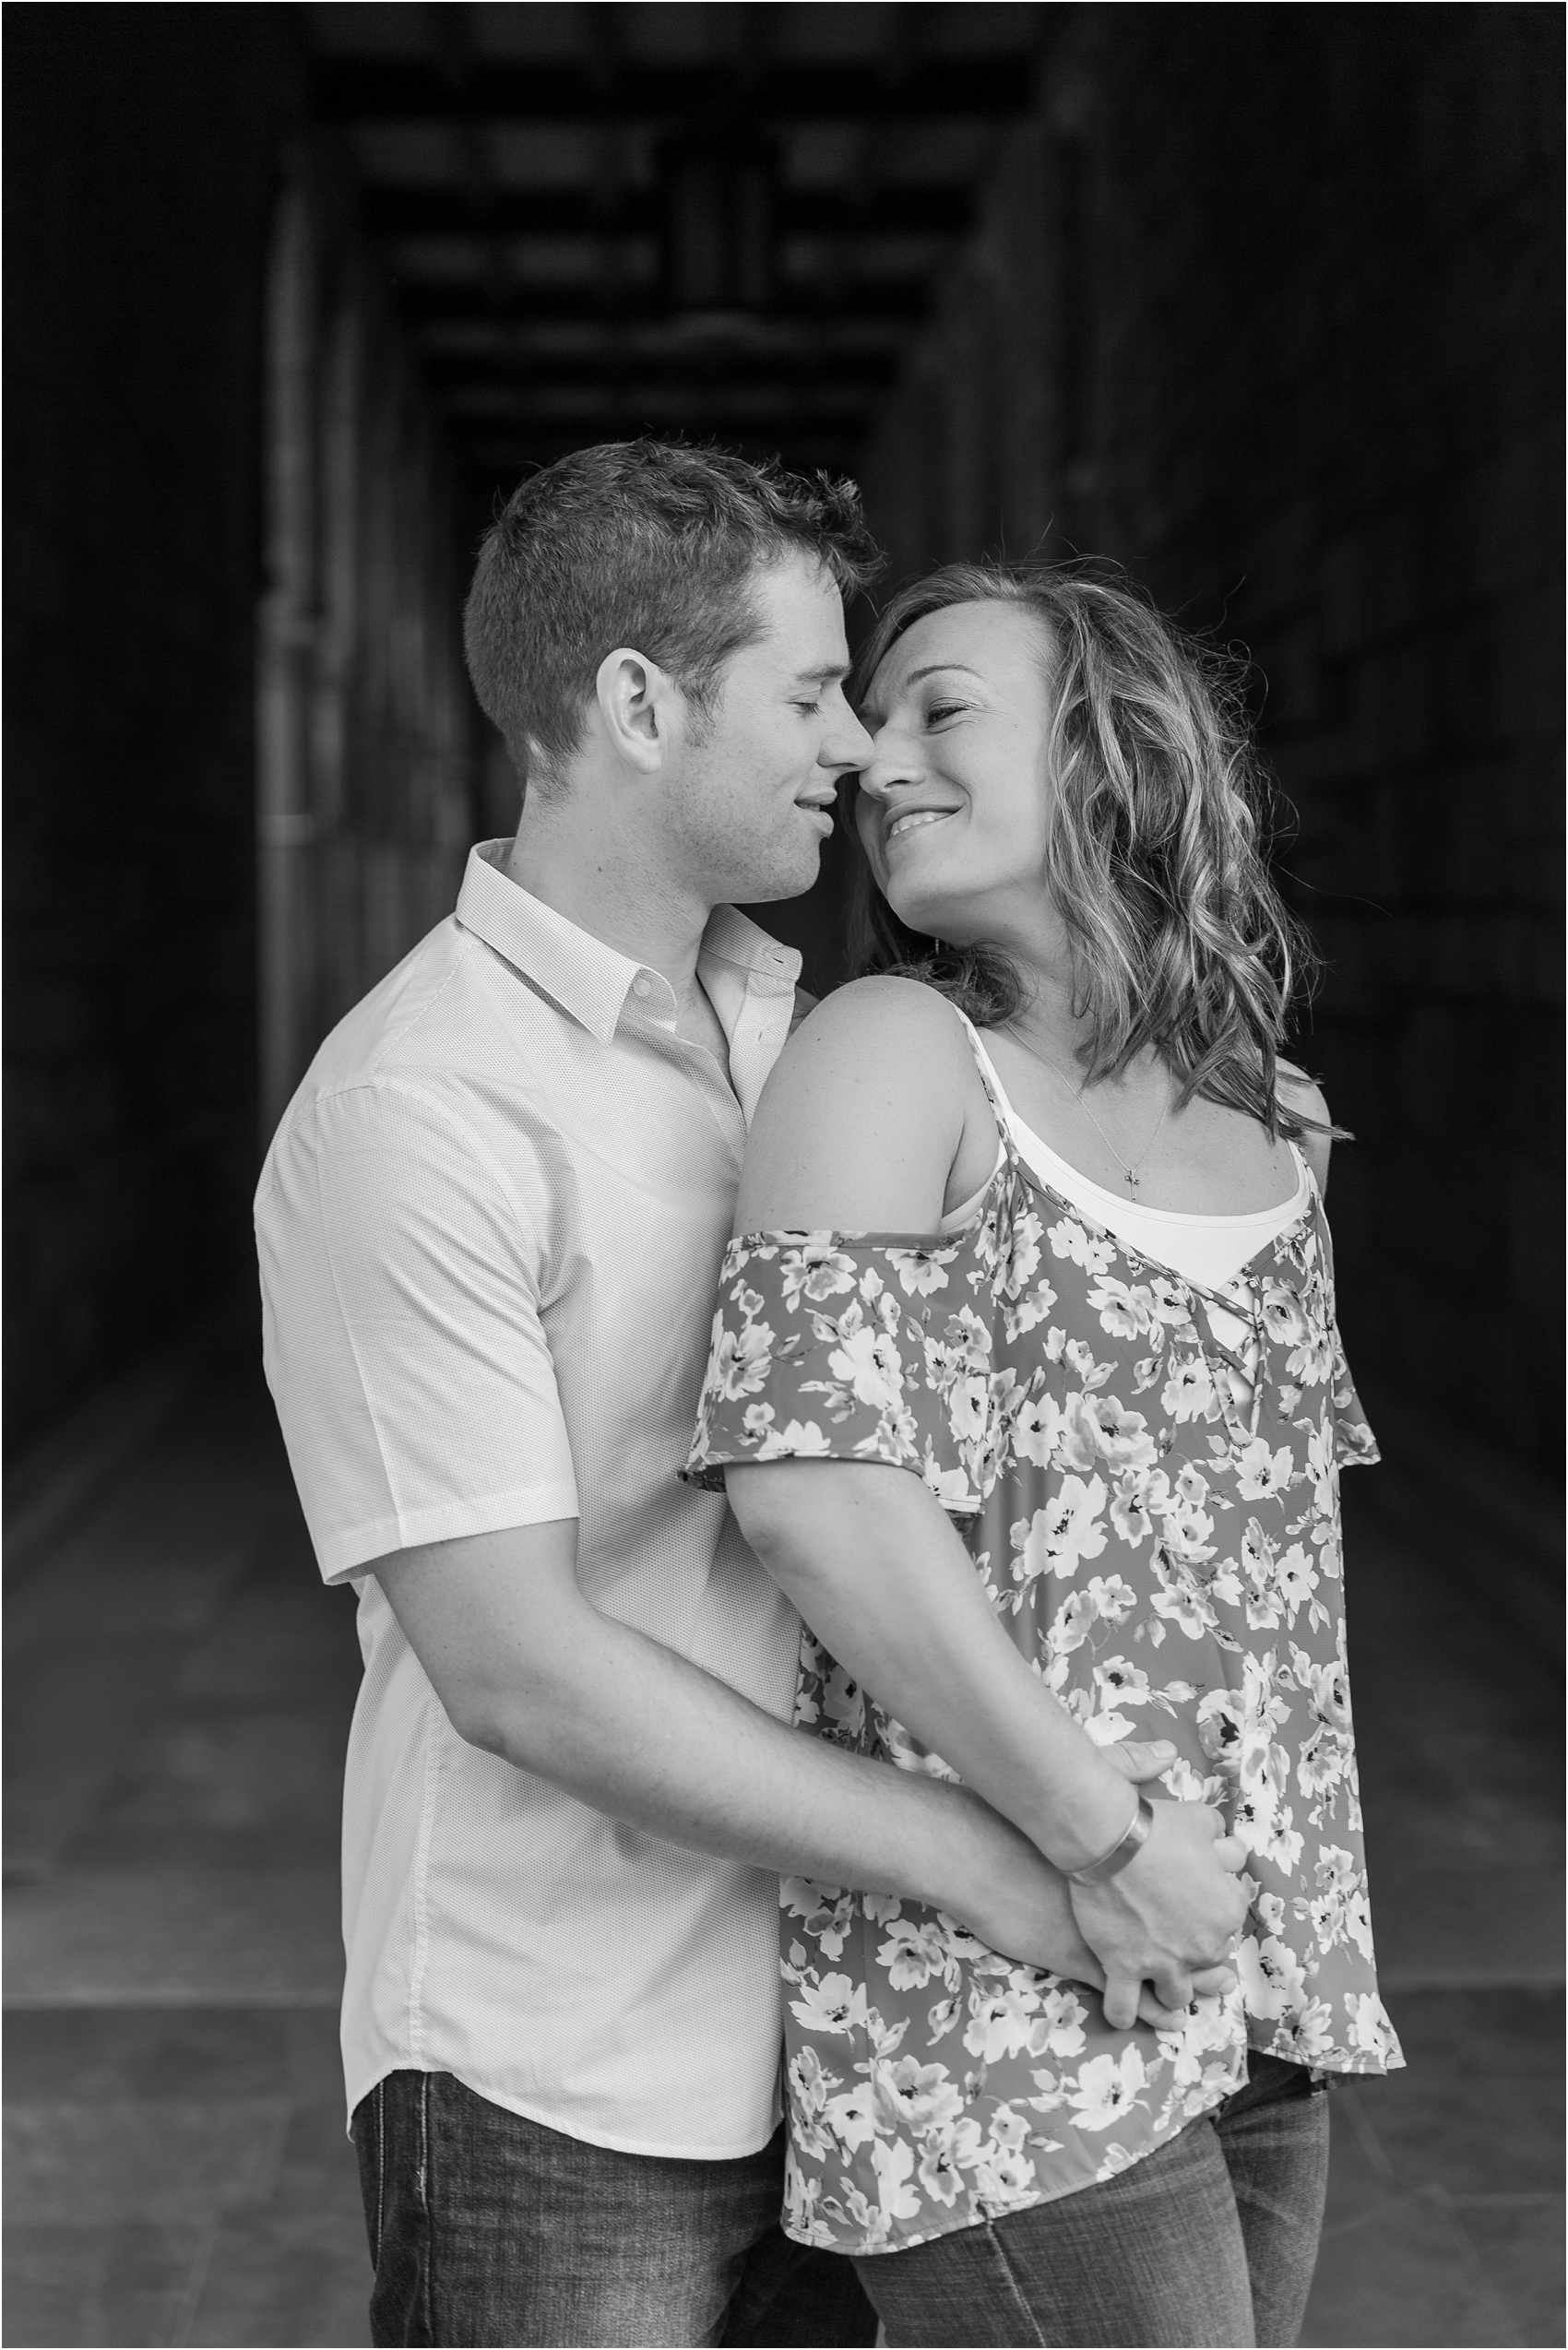 fun-adventurous-engagement-photos-at-the-nickels-arcade-in-ann-arbor-mi-by-courtney-carolyn-photography_0025.jpg